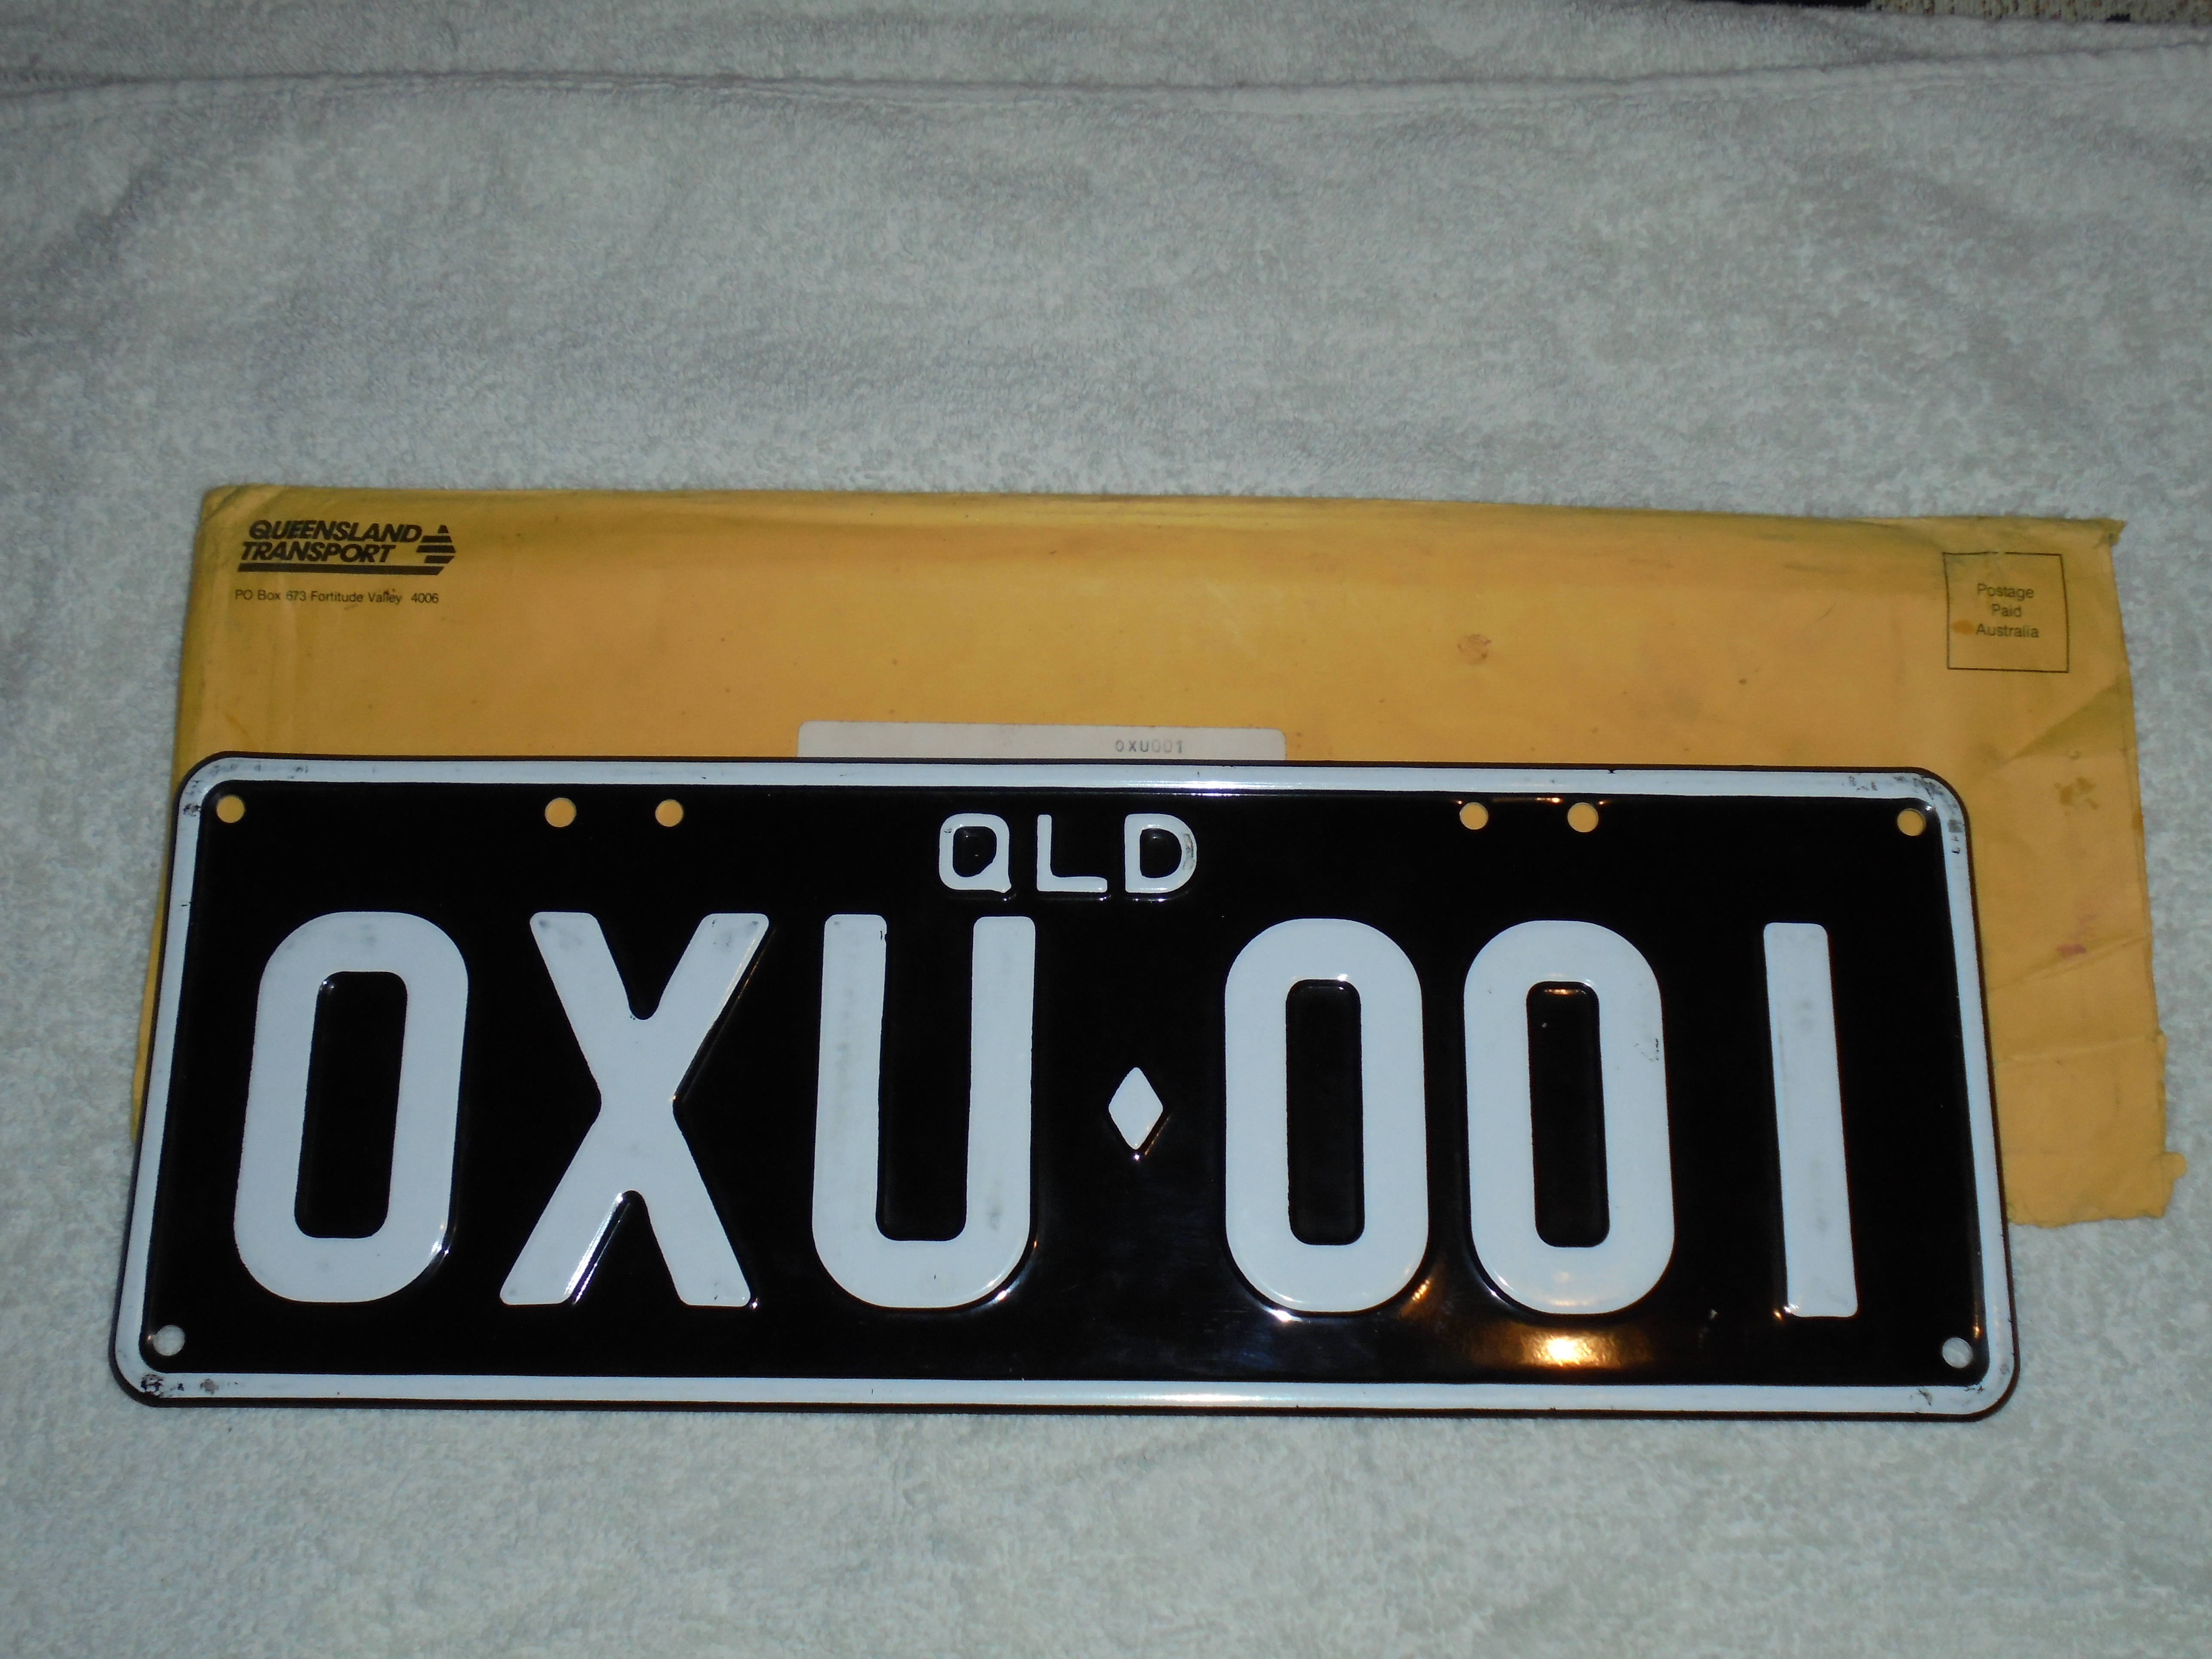 New Genuine QLD Black & White Number Plates -SUIT Any 1956 Vehicle